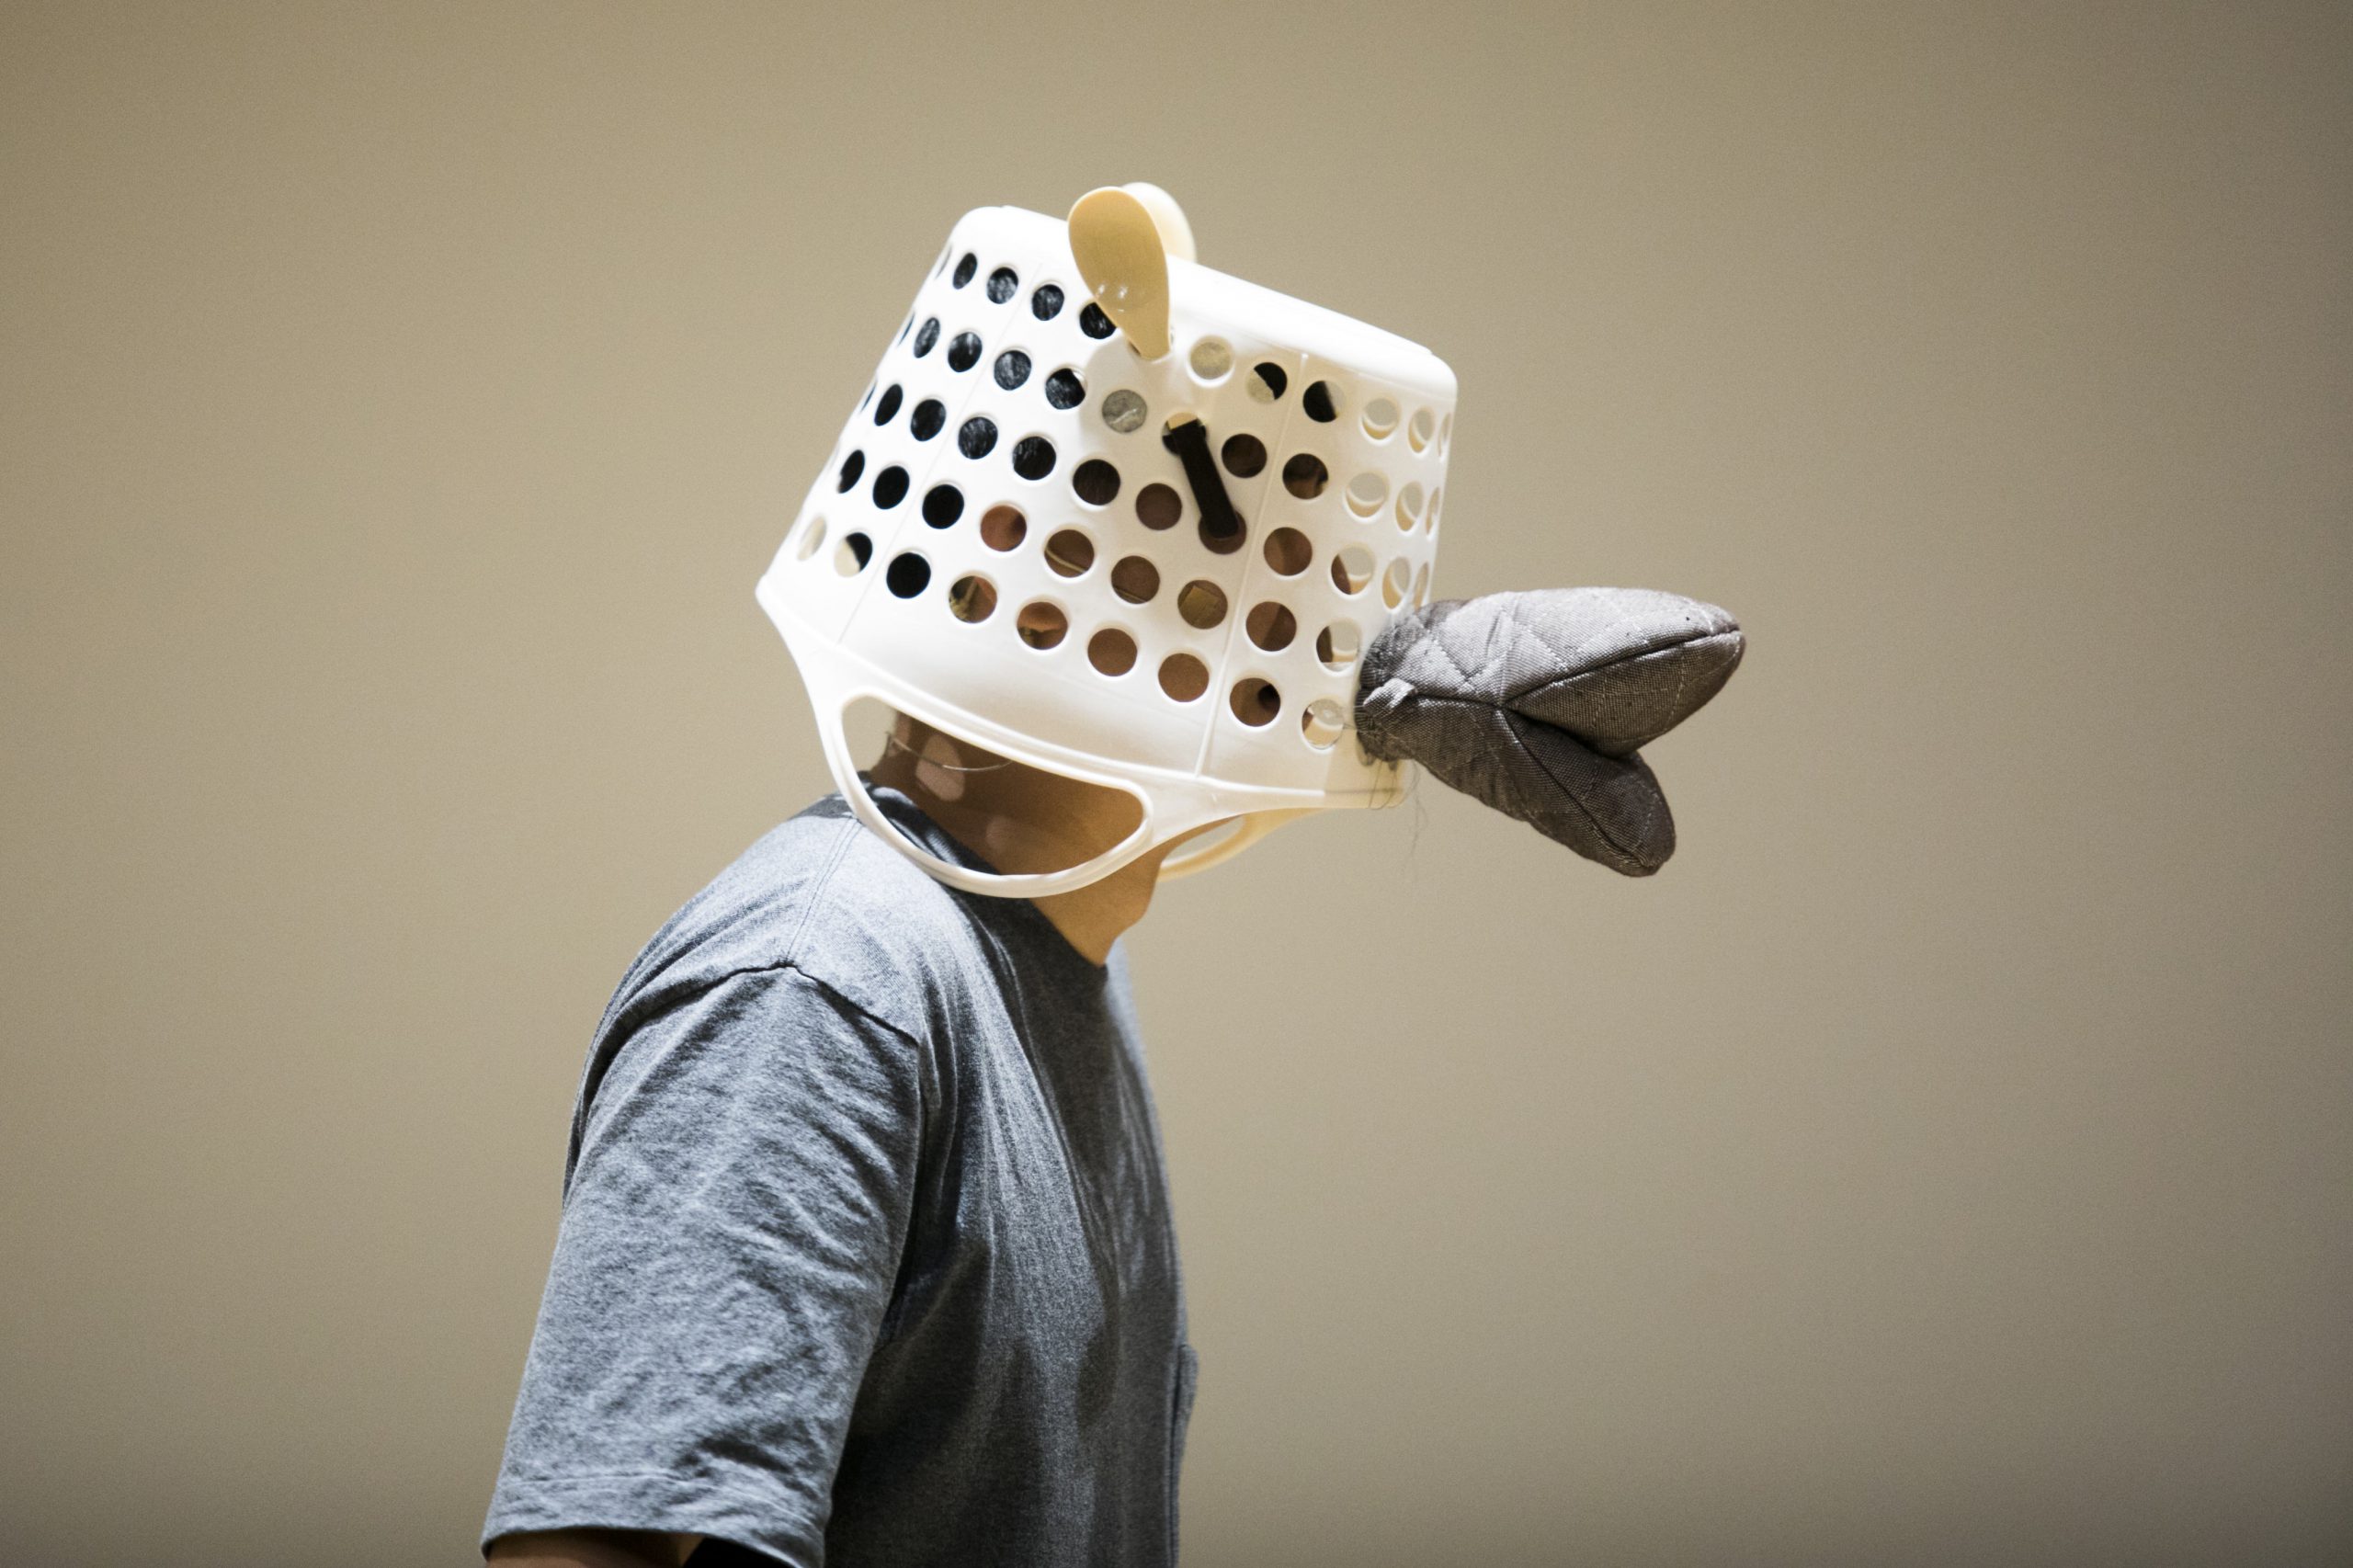 An actor wearing a basket head gear with a hand glove as lips in School Show The Wolf of Mr Dong Guo by Paper Monkey Theatre Ltd